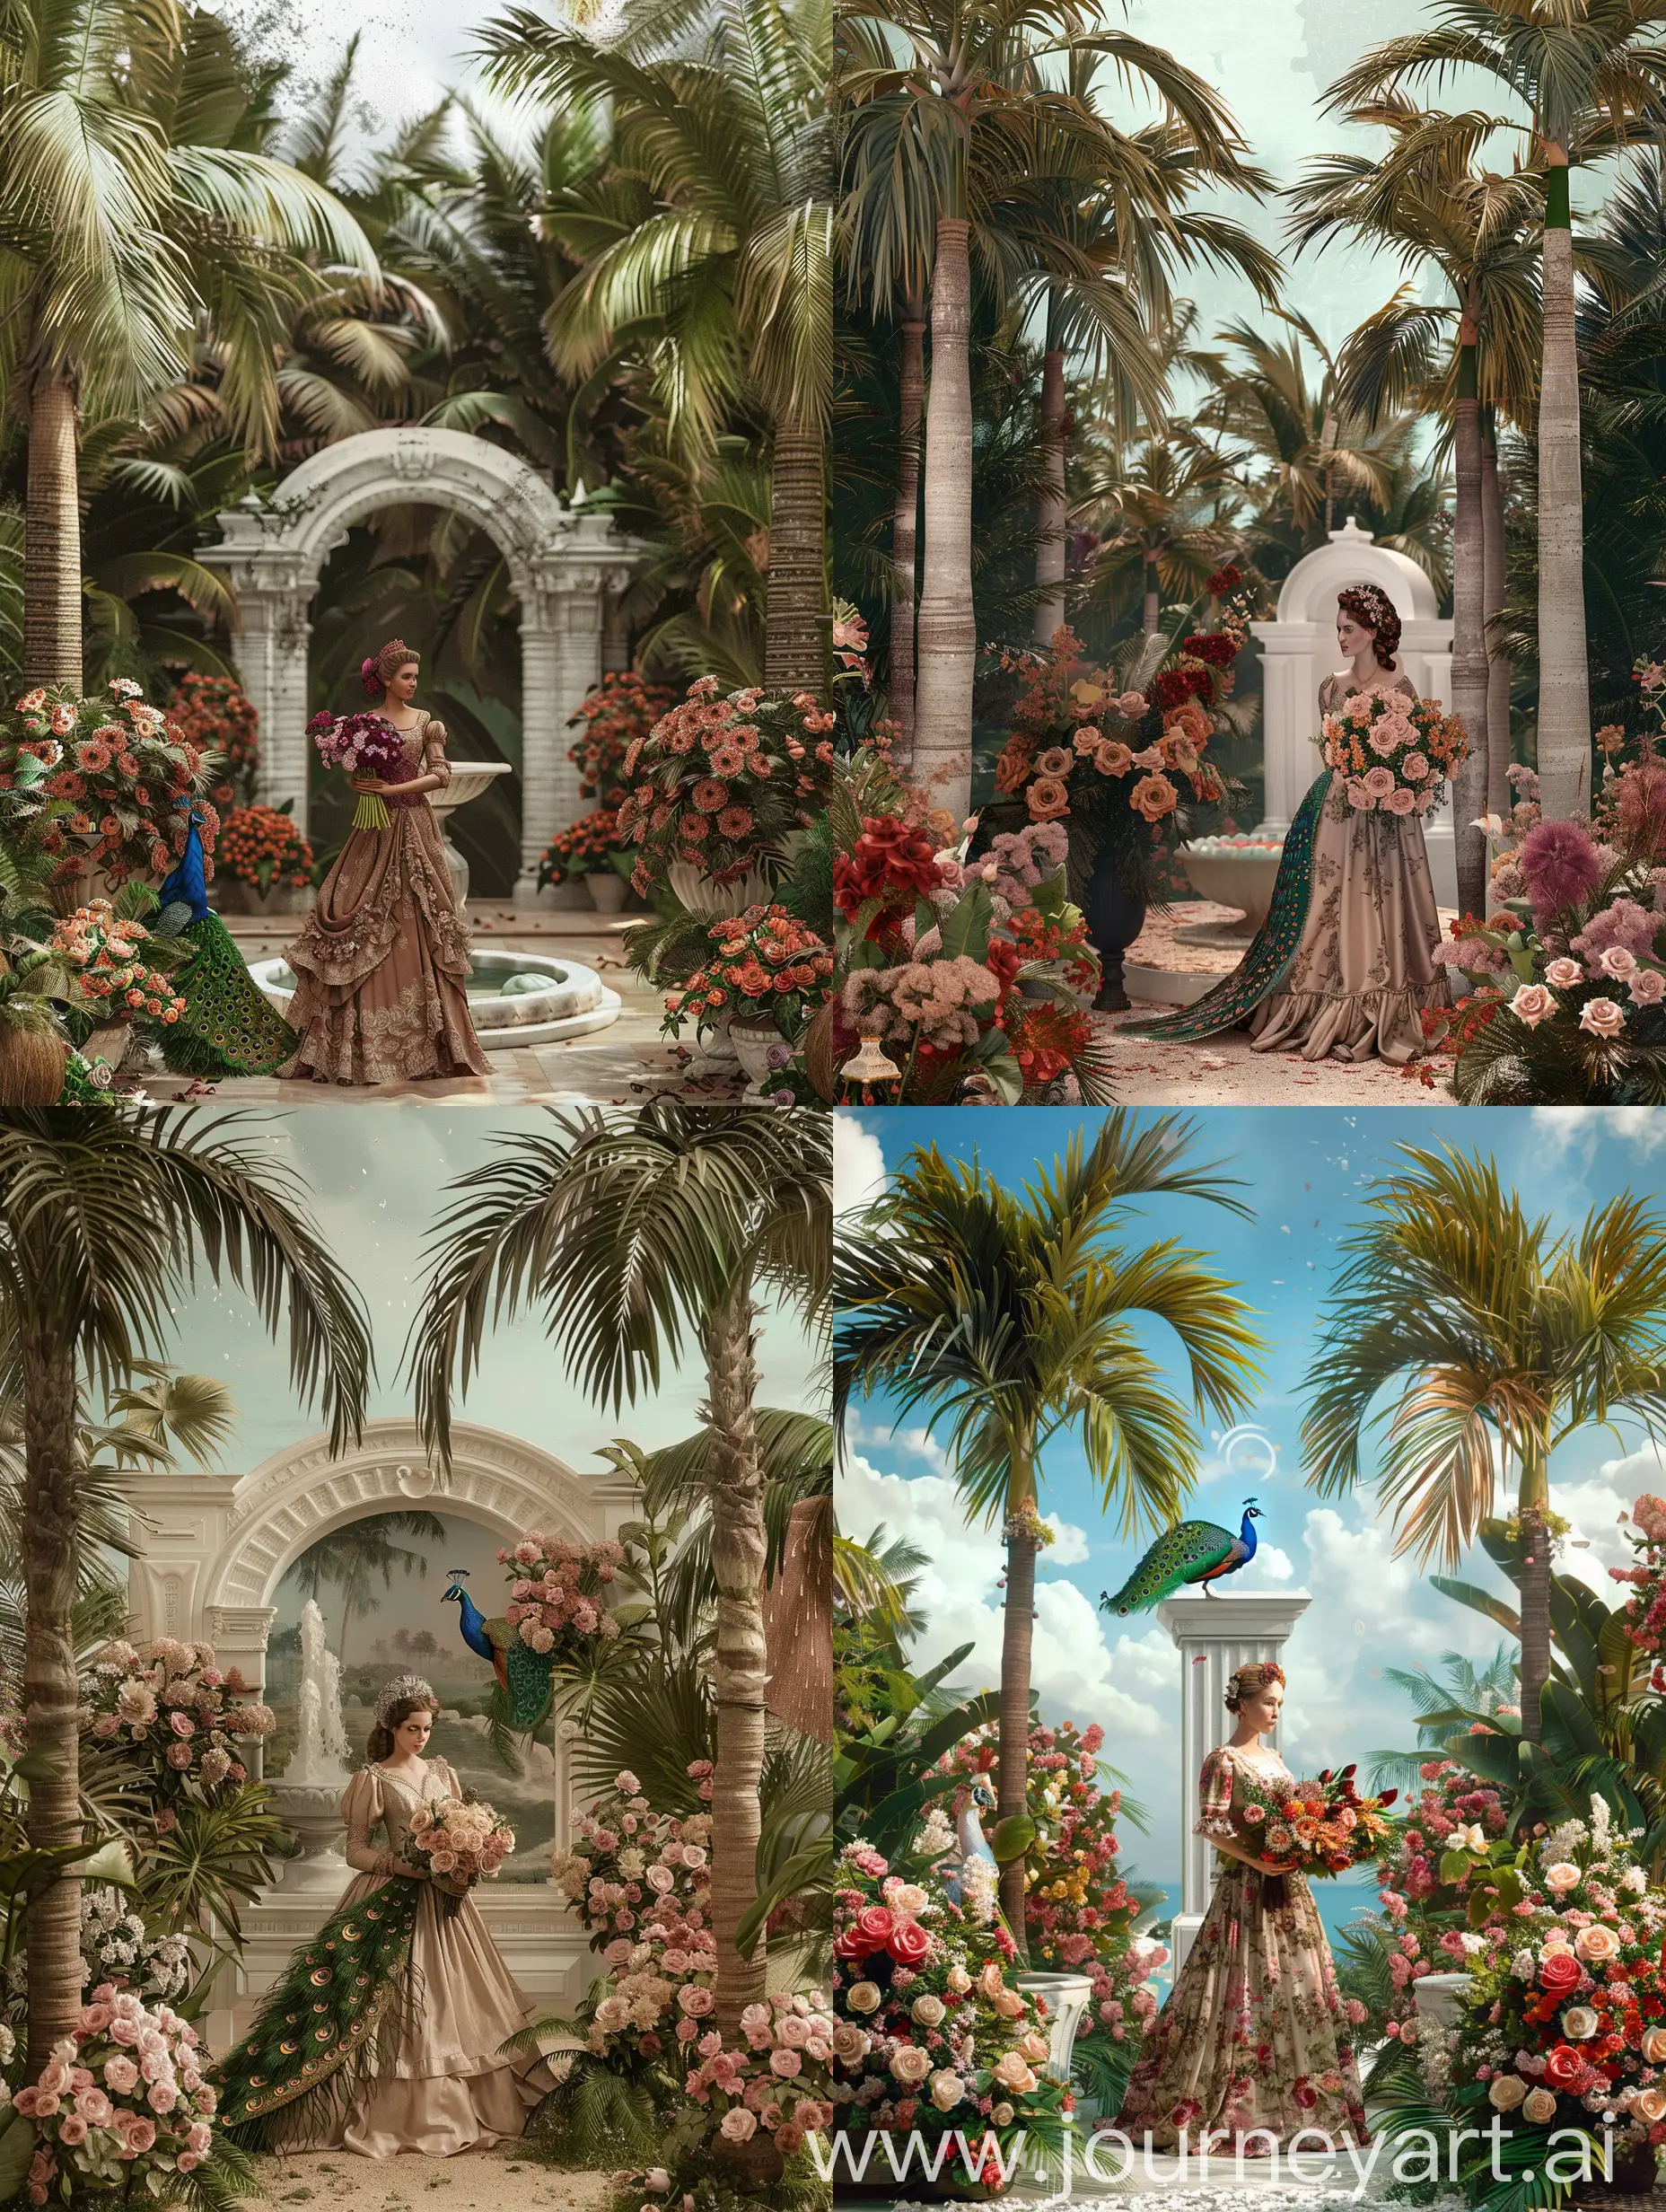 Realistic Tropical Victorian Flower Garden with a Victorian Woman in a beautiful Victorian ball gown holding a bouquet of flowers. Tall coconut trees both sides. A small Water fountain with a peacock in the fountain. A  big vase of roses. A tall white monolithic arche.